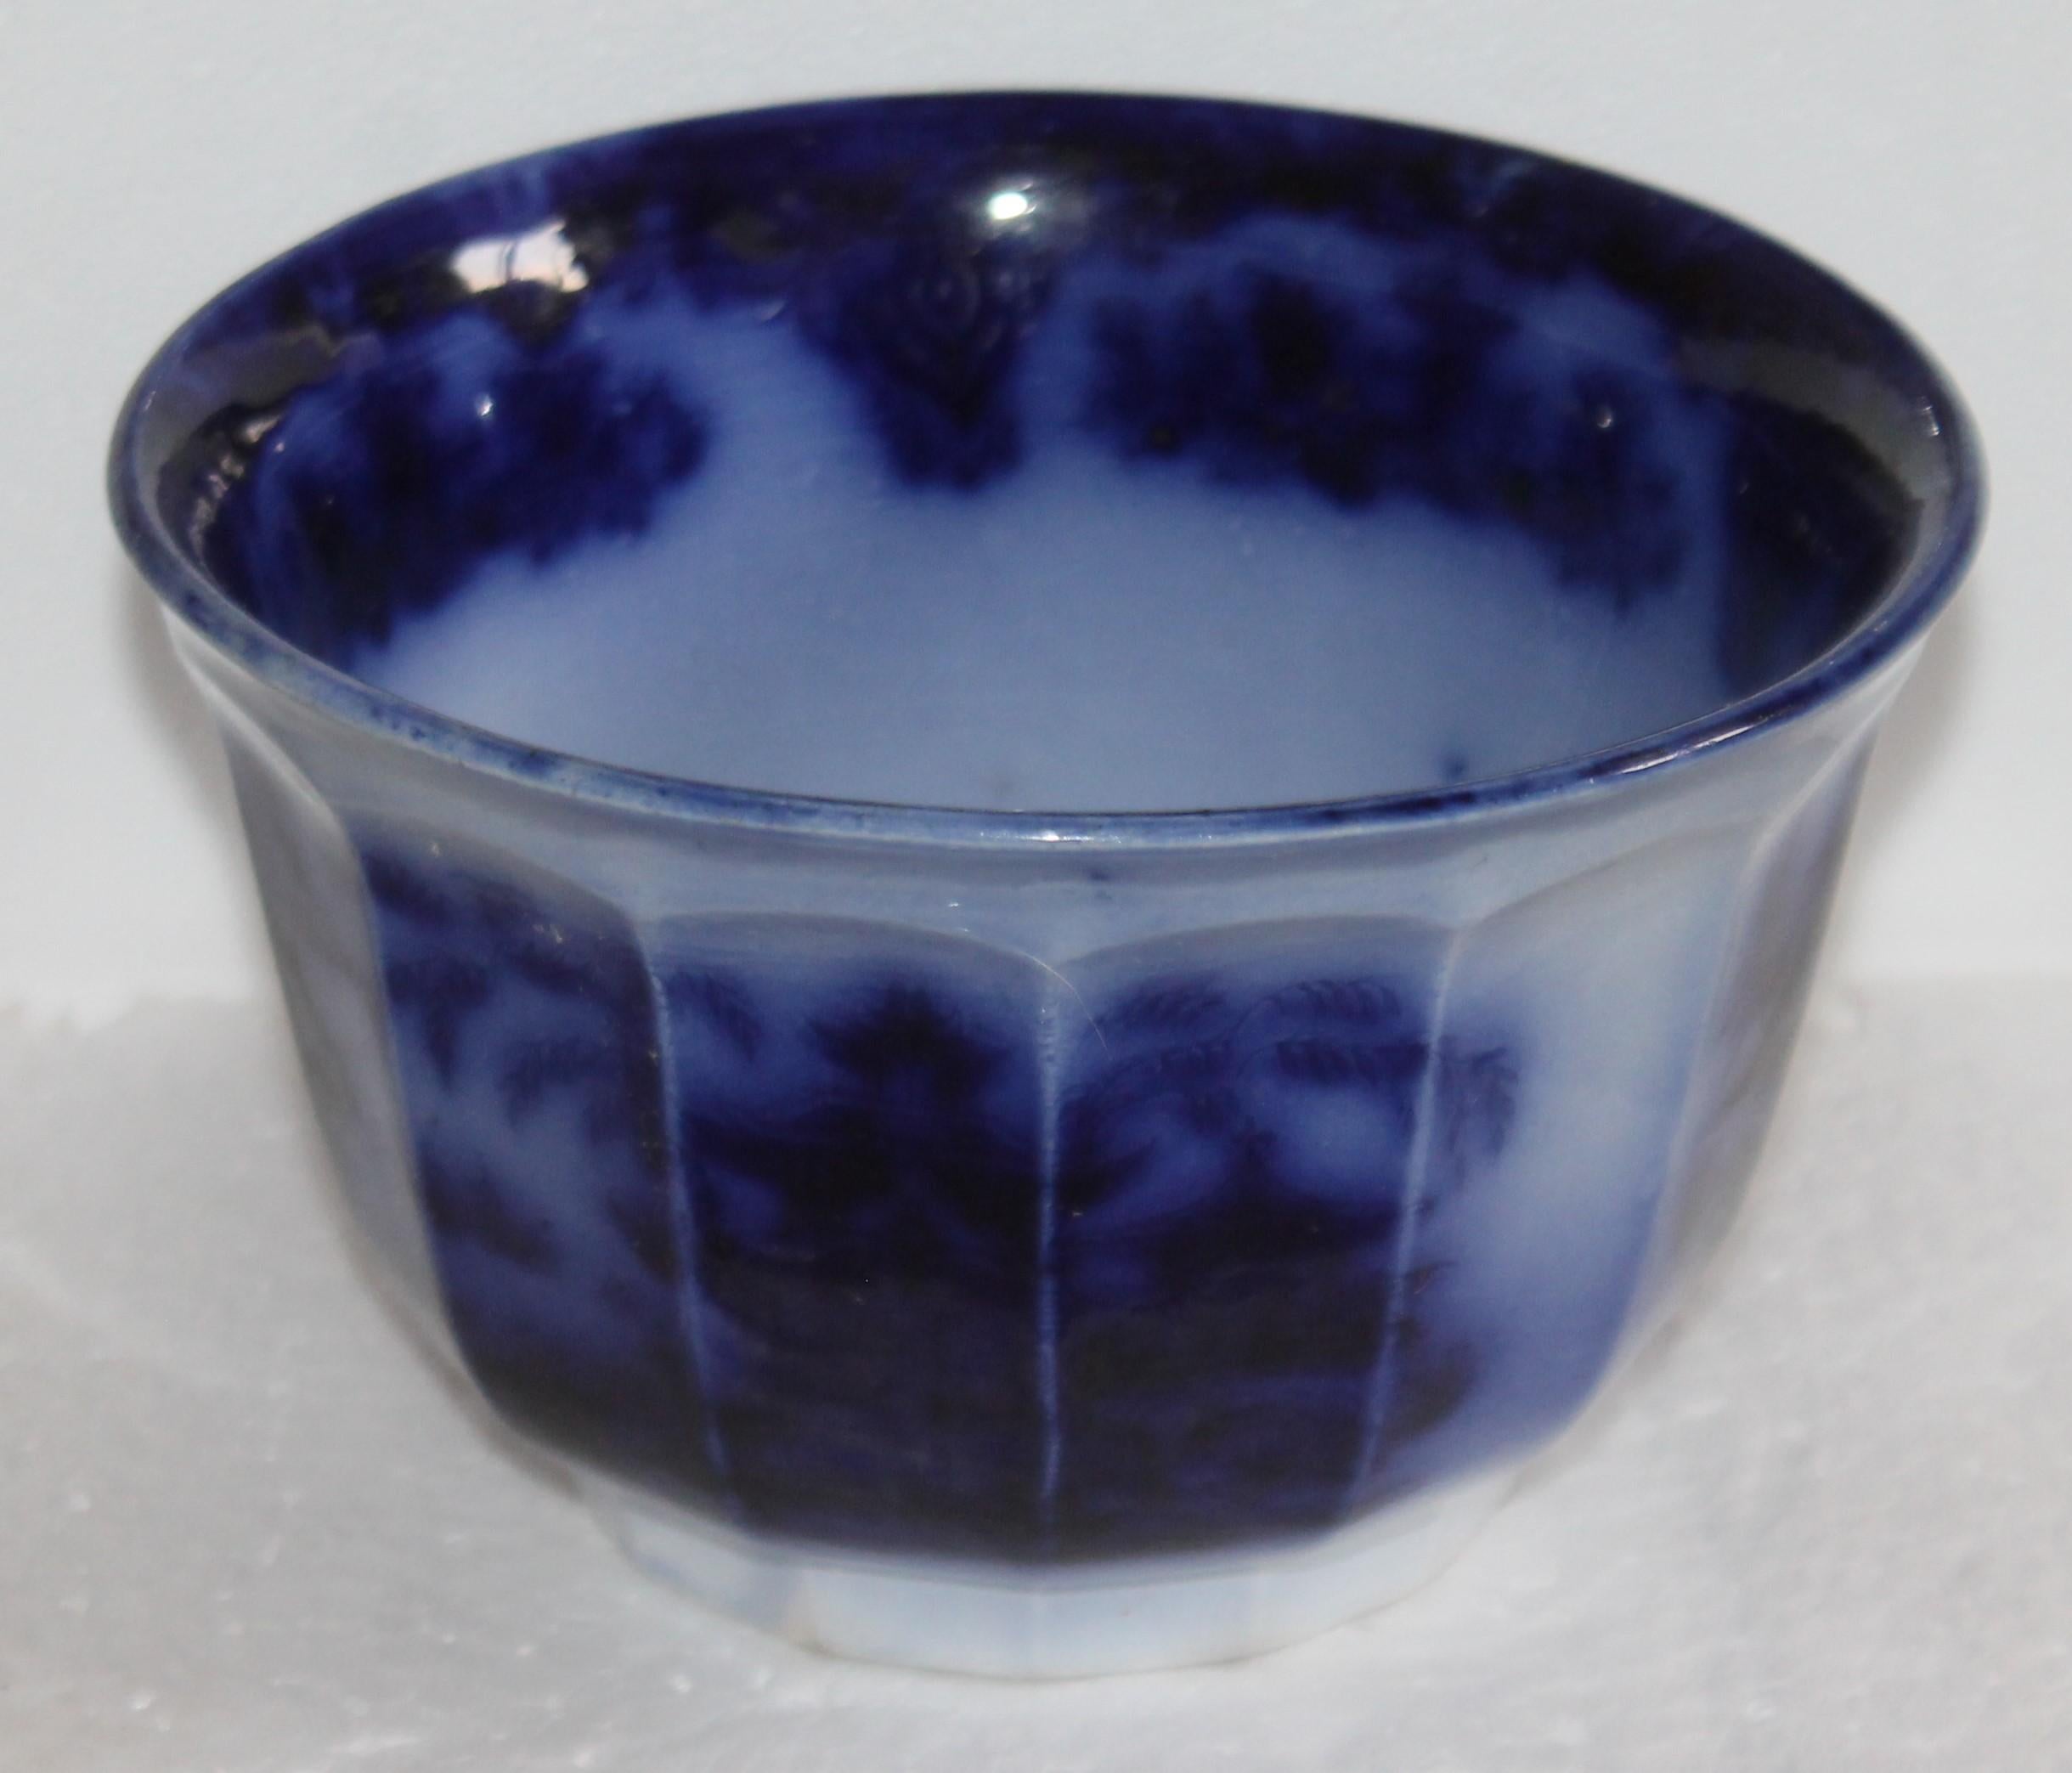 19th century flo-blue waste bowl that the pattern looks like Shapoo but it is too hard to see the pattern as its smeared together.